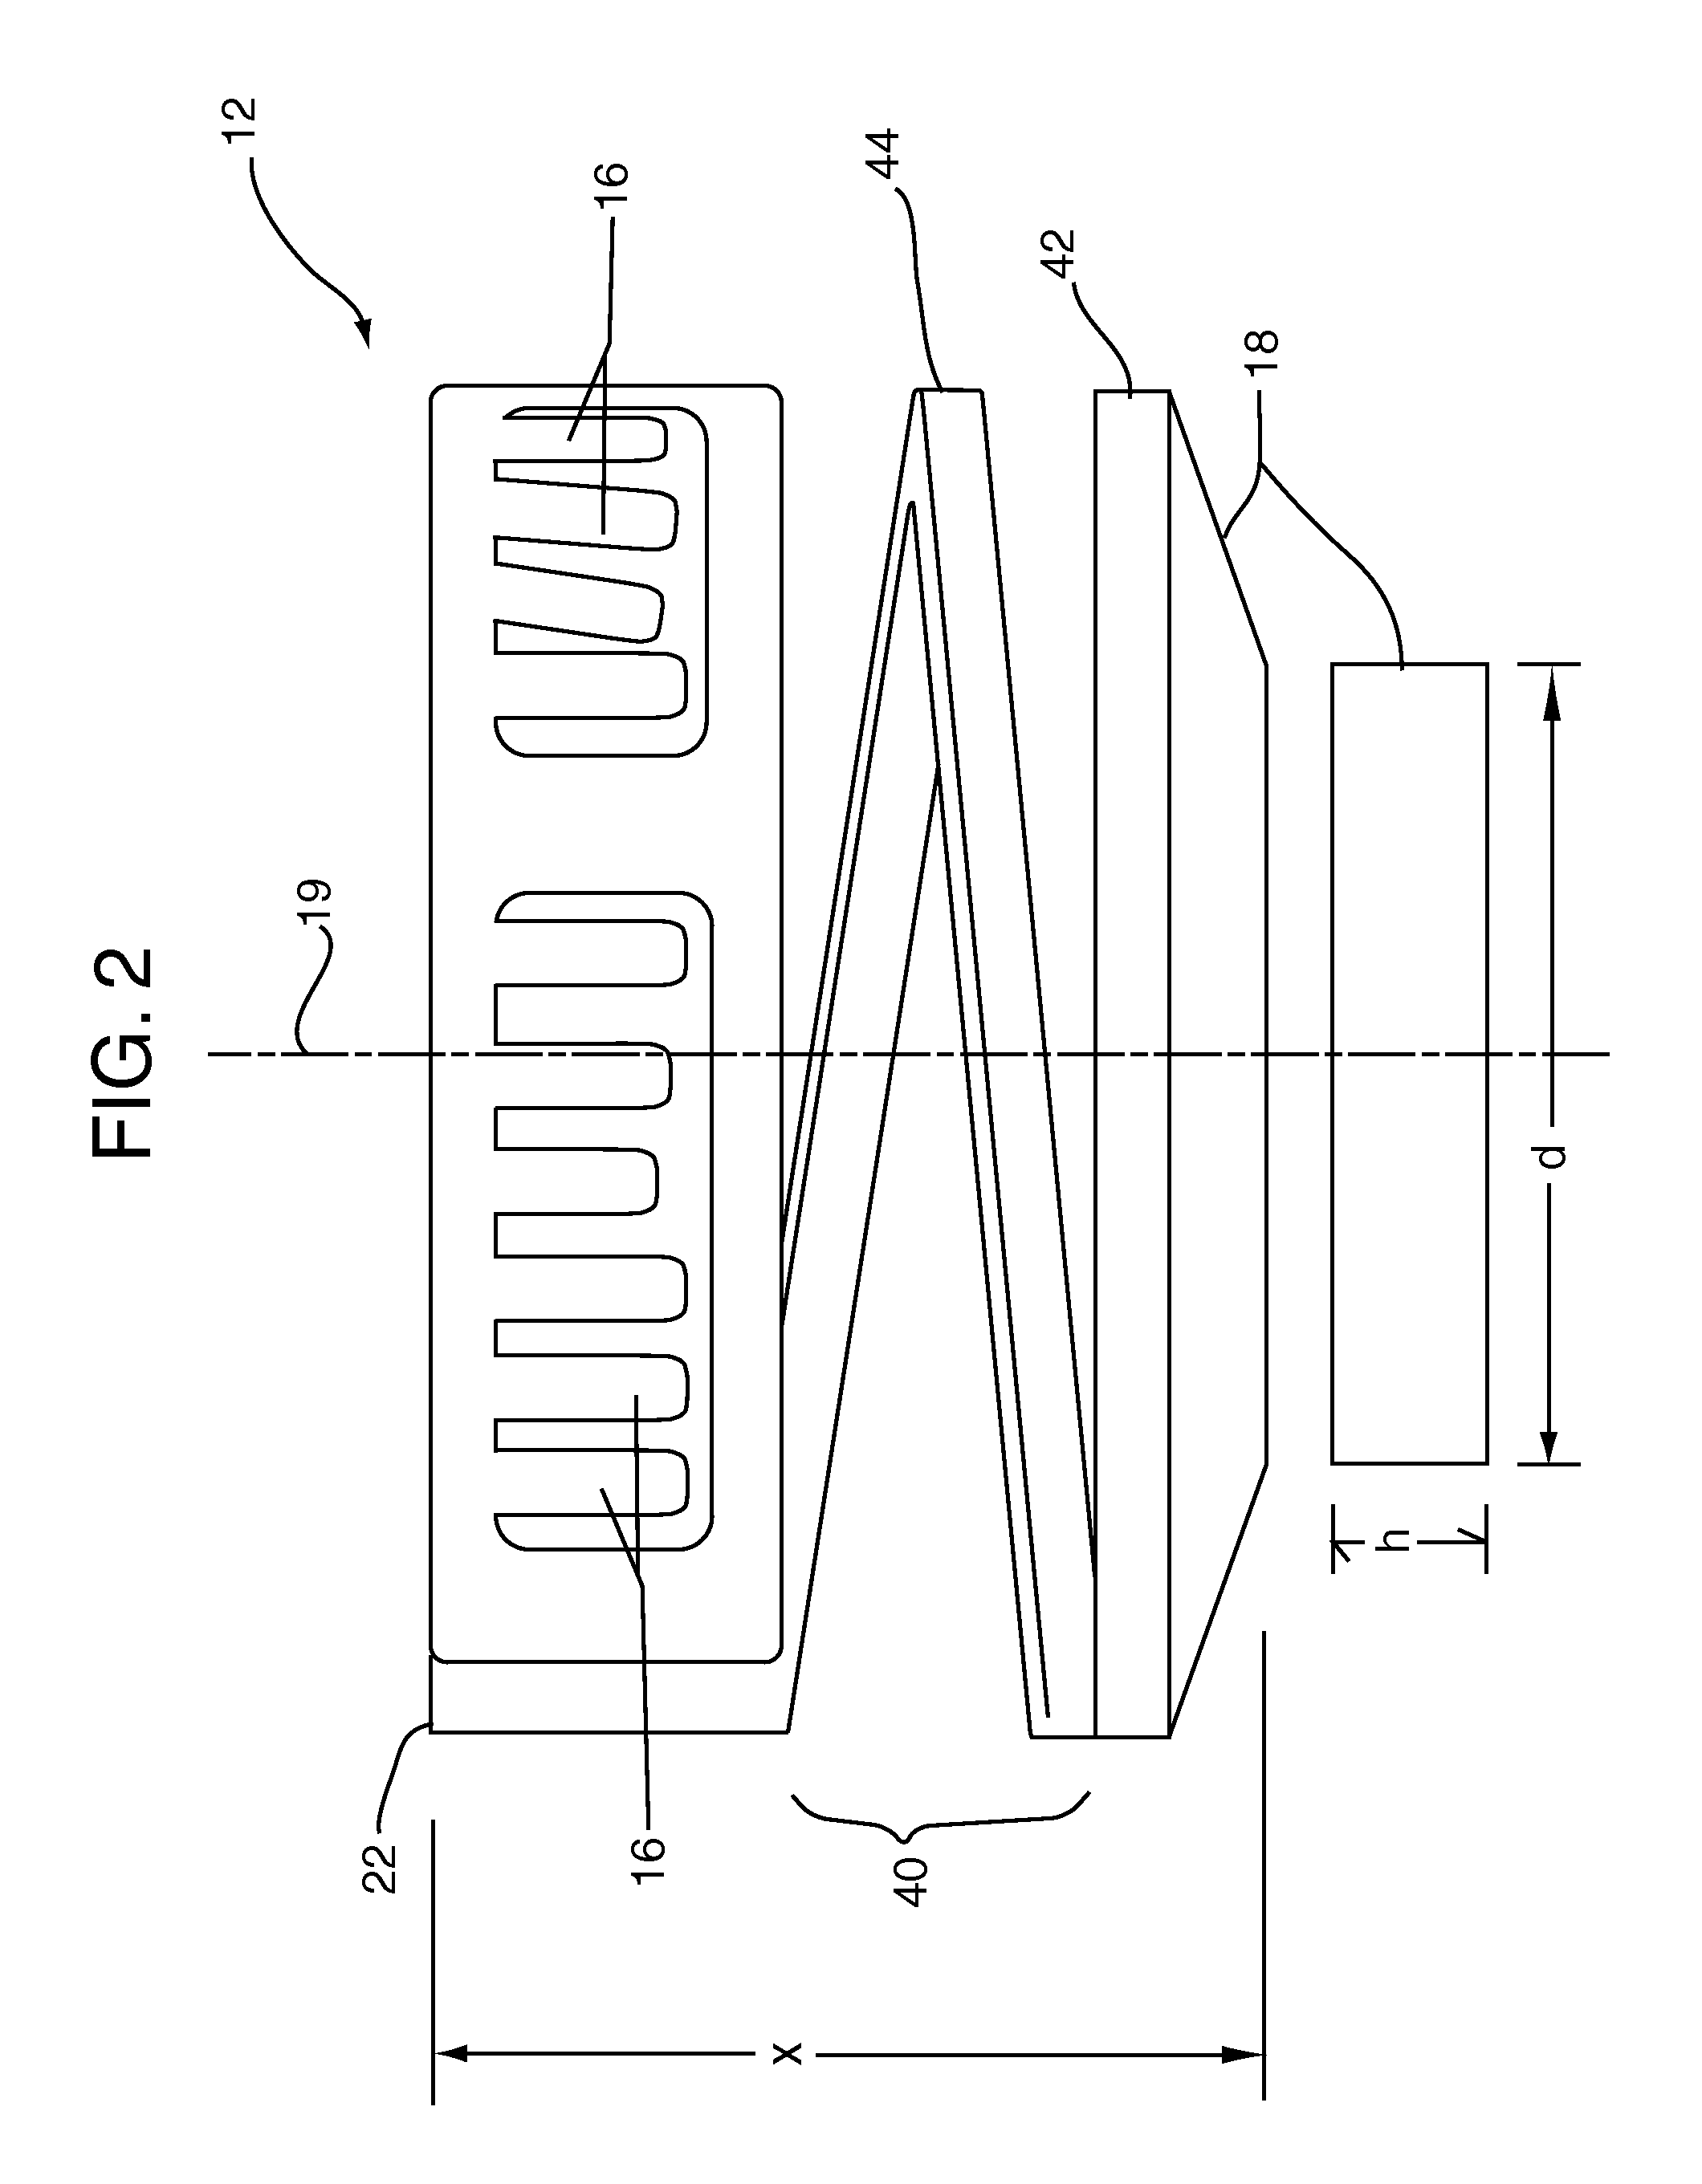 Gasket with spring collar for prosthetic heart valves and methods for making and using them